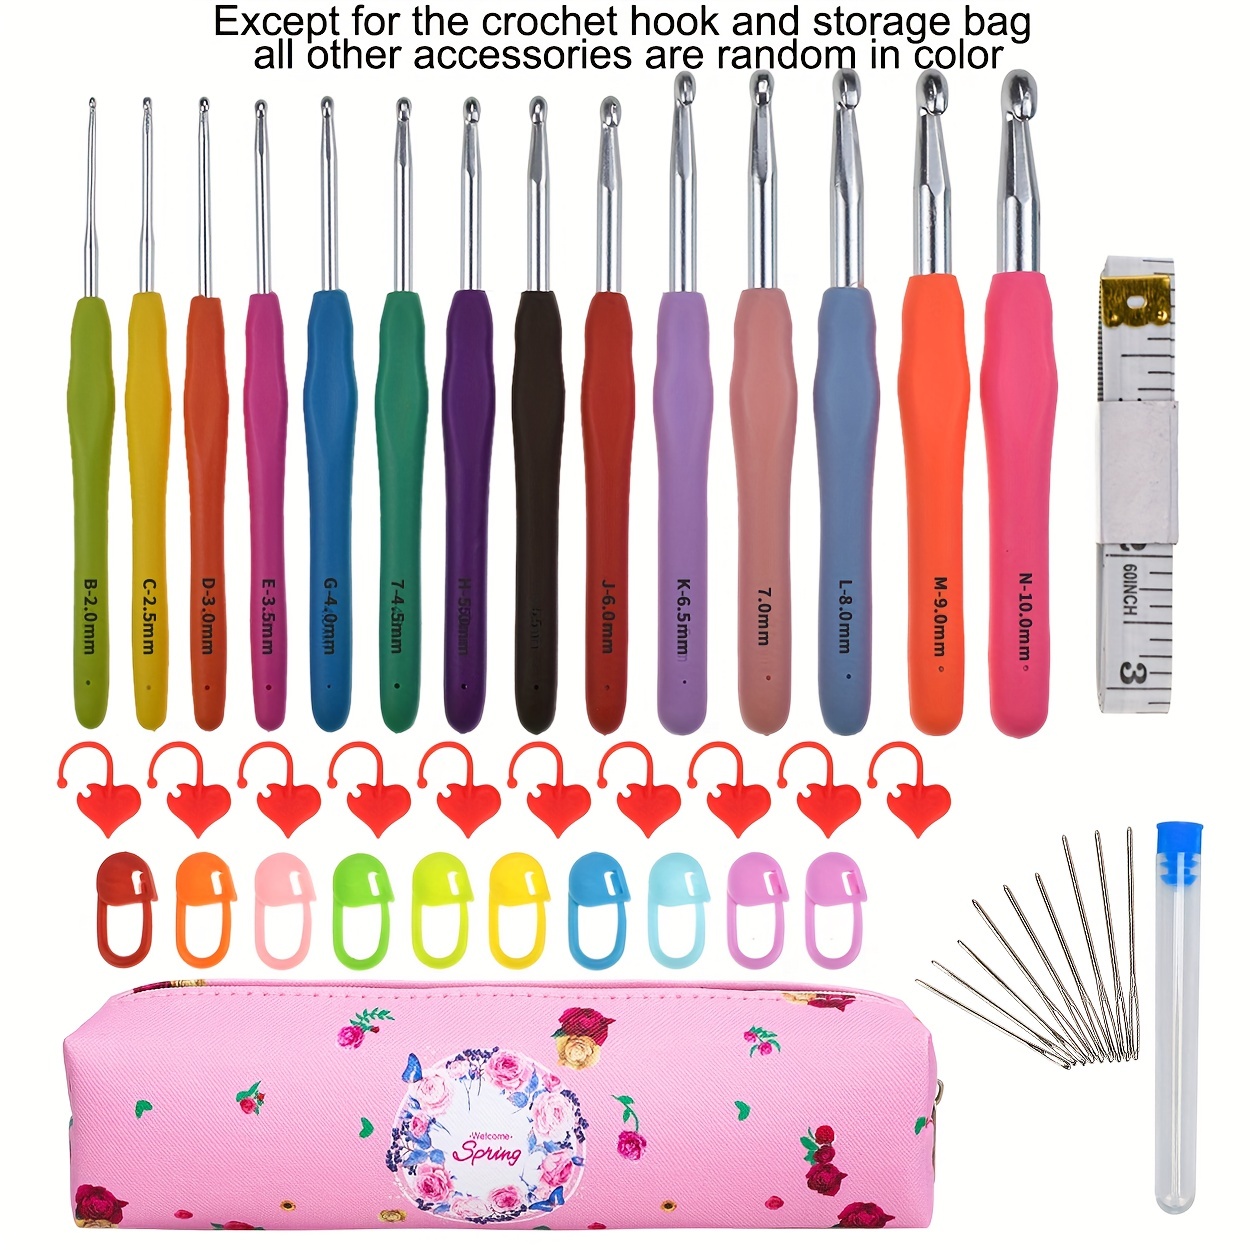 2 mm Crochet Hook, Wooden Handle Crochet Hooks 2.0 mm of Metal Hook, with 3  Big-Eyed Blunt Sewing Needles, 5 Markers and 1 Needle Storage Bottle, for